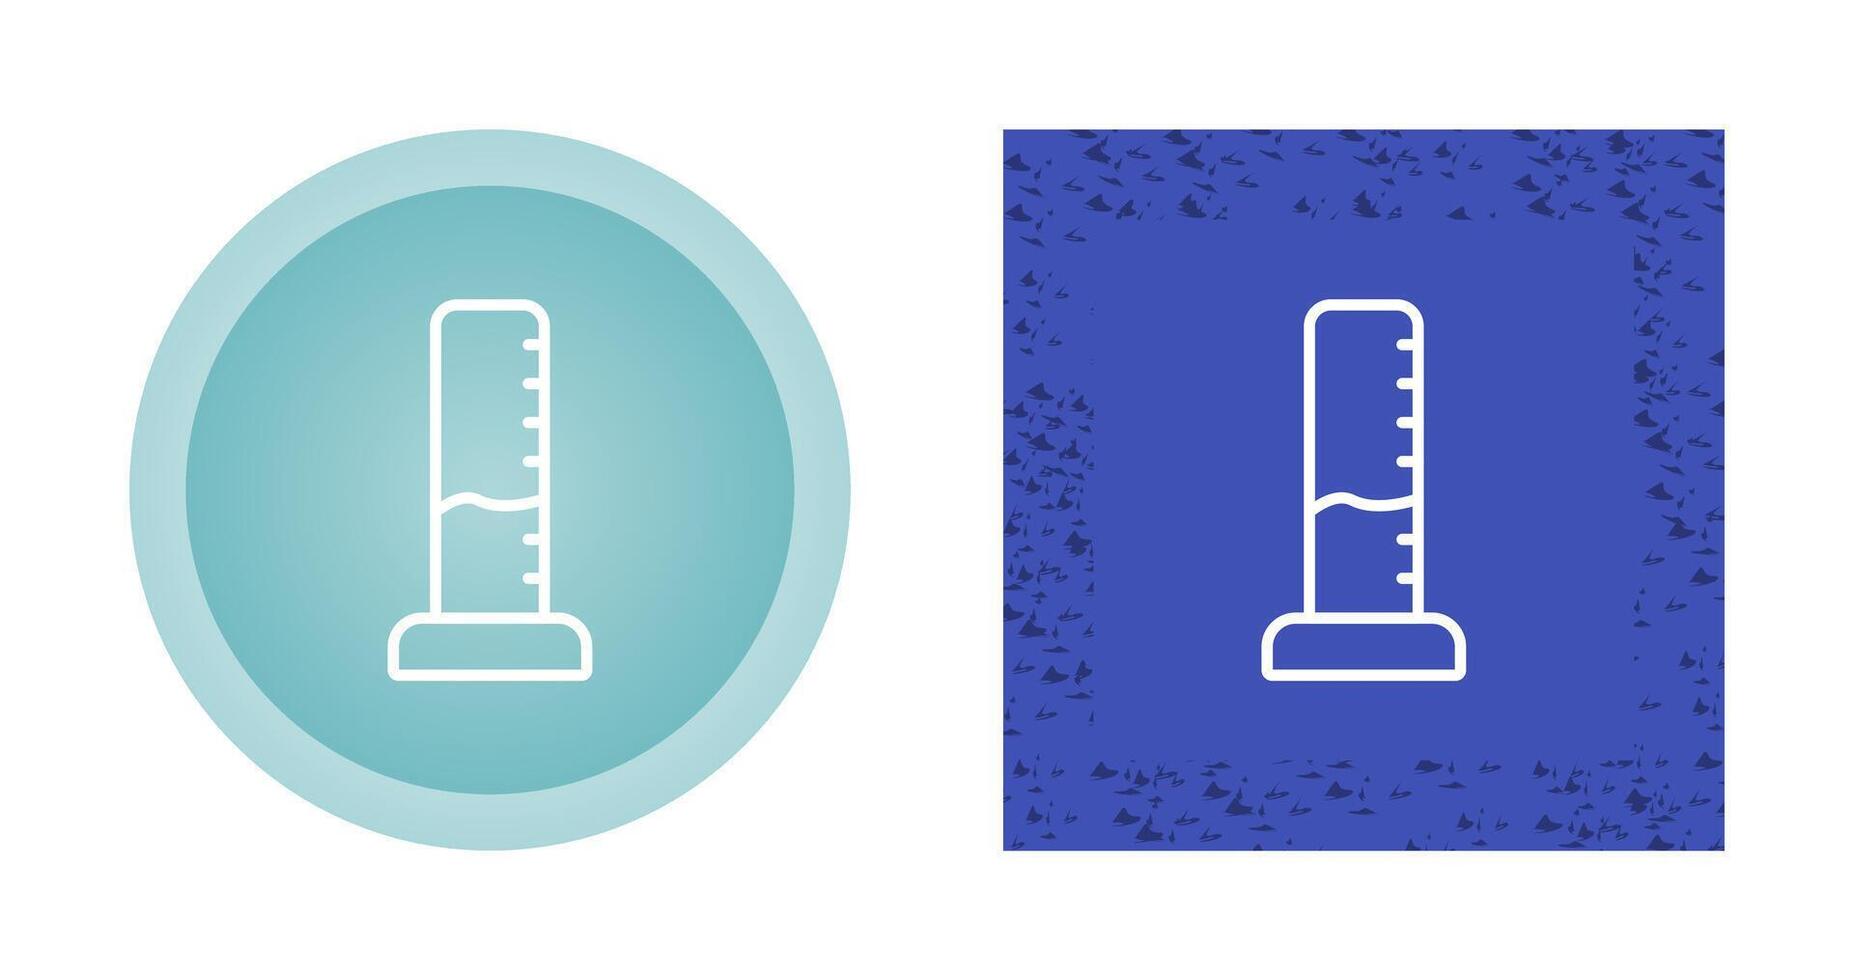 Graduated Cylinder Vector Icon